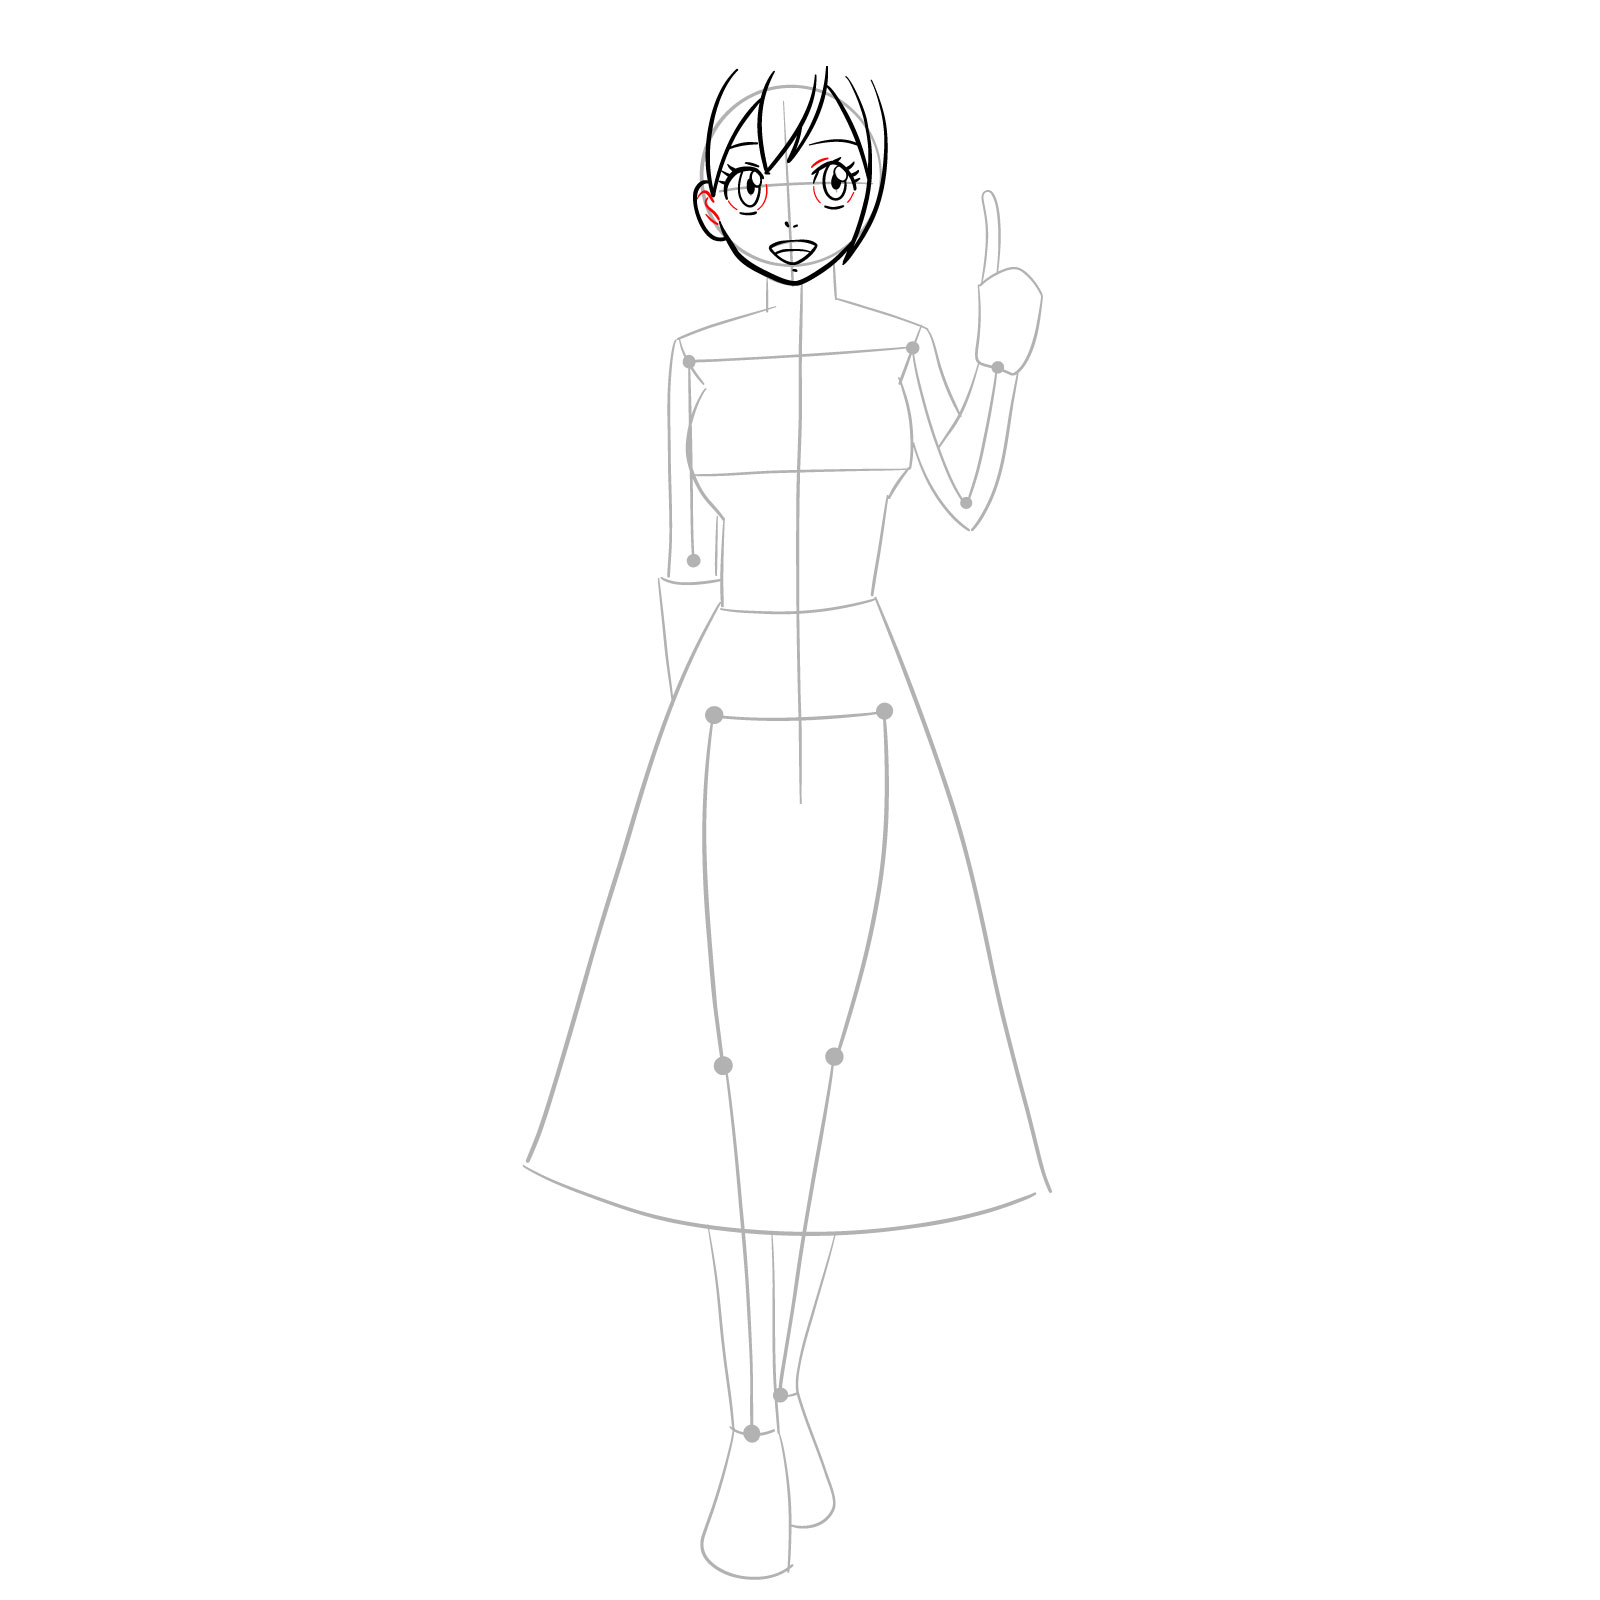 How to draw Lisanna Strauss from Fairy Tail - step 10